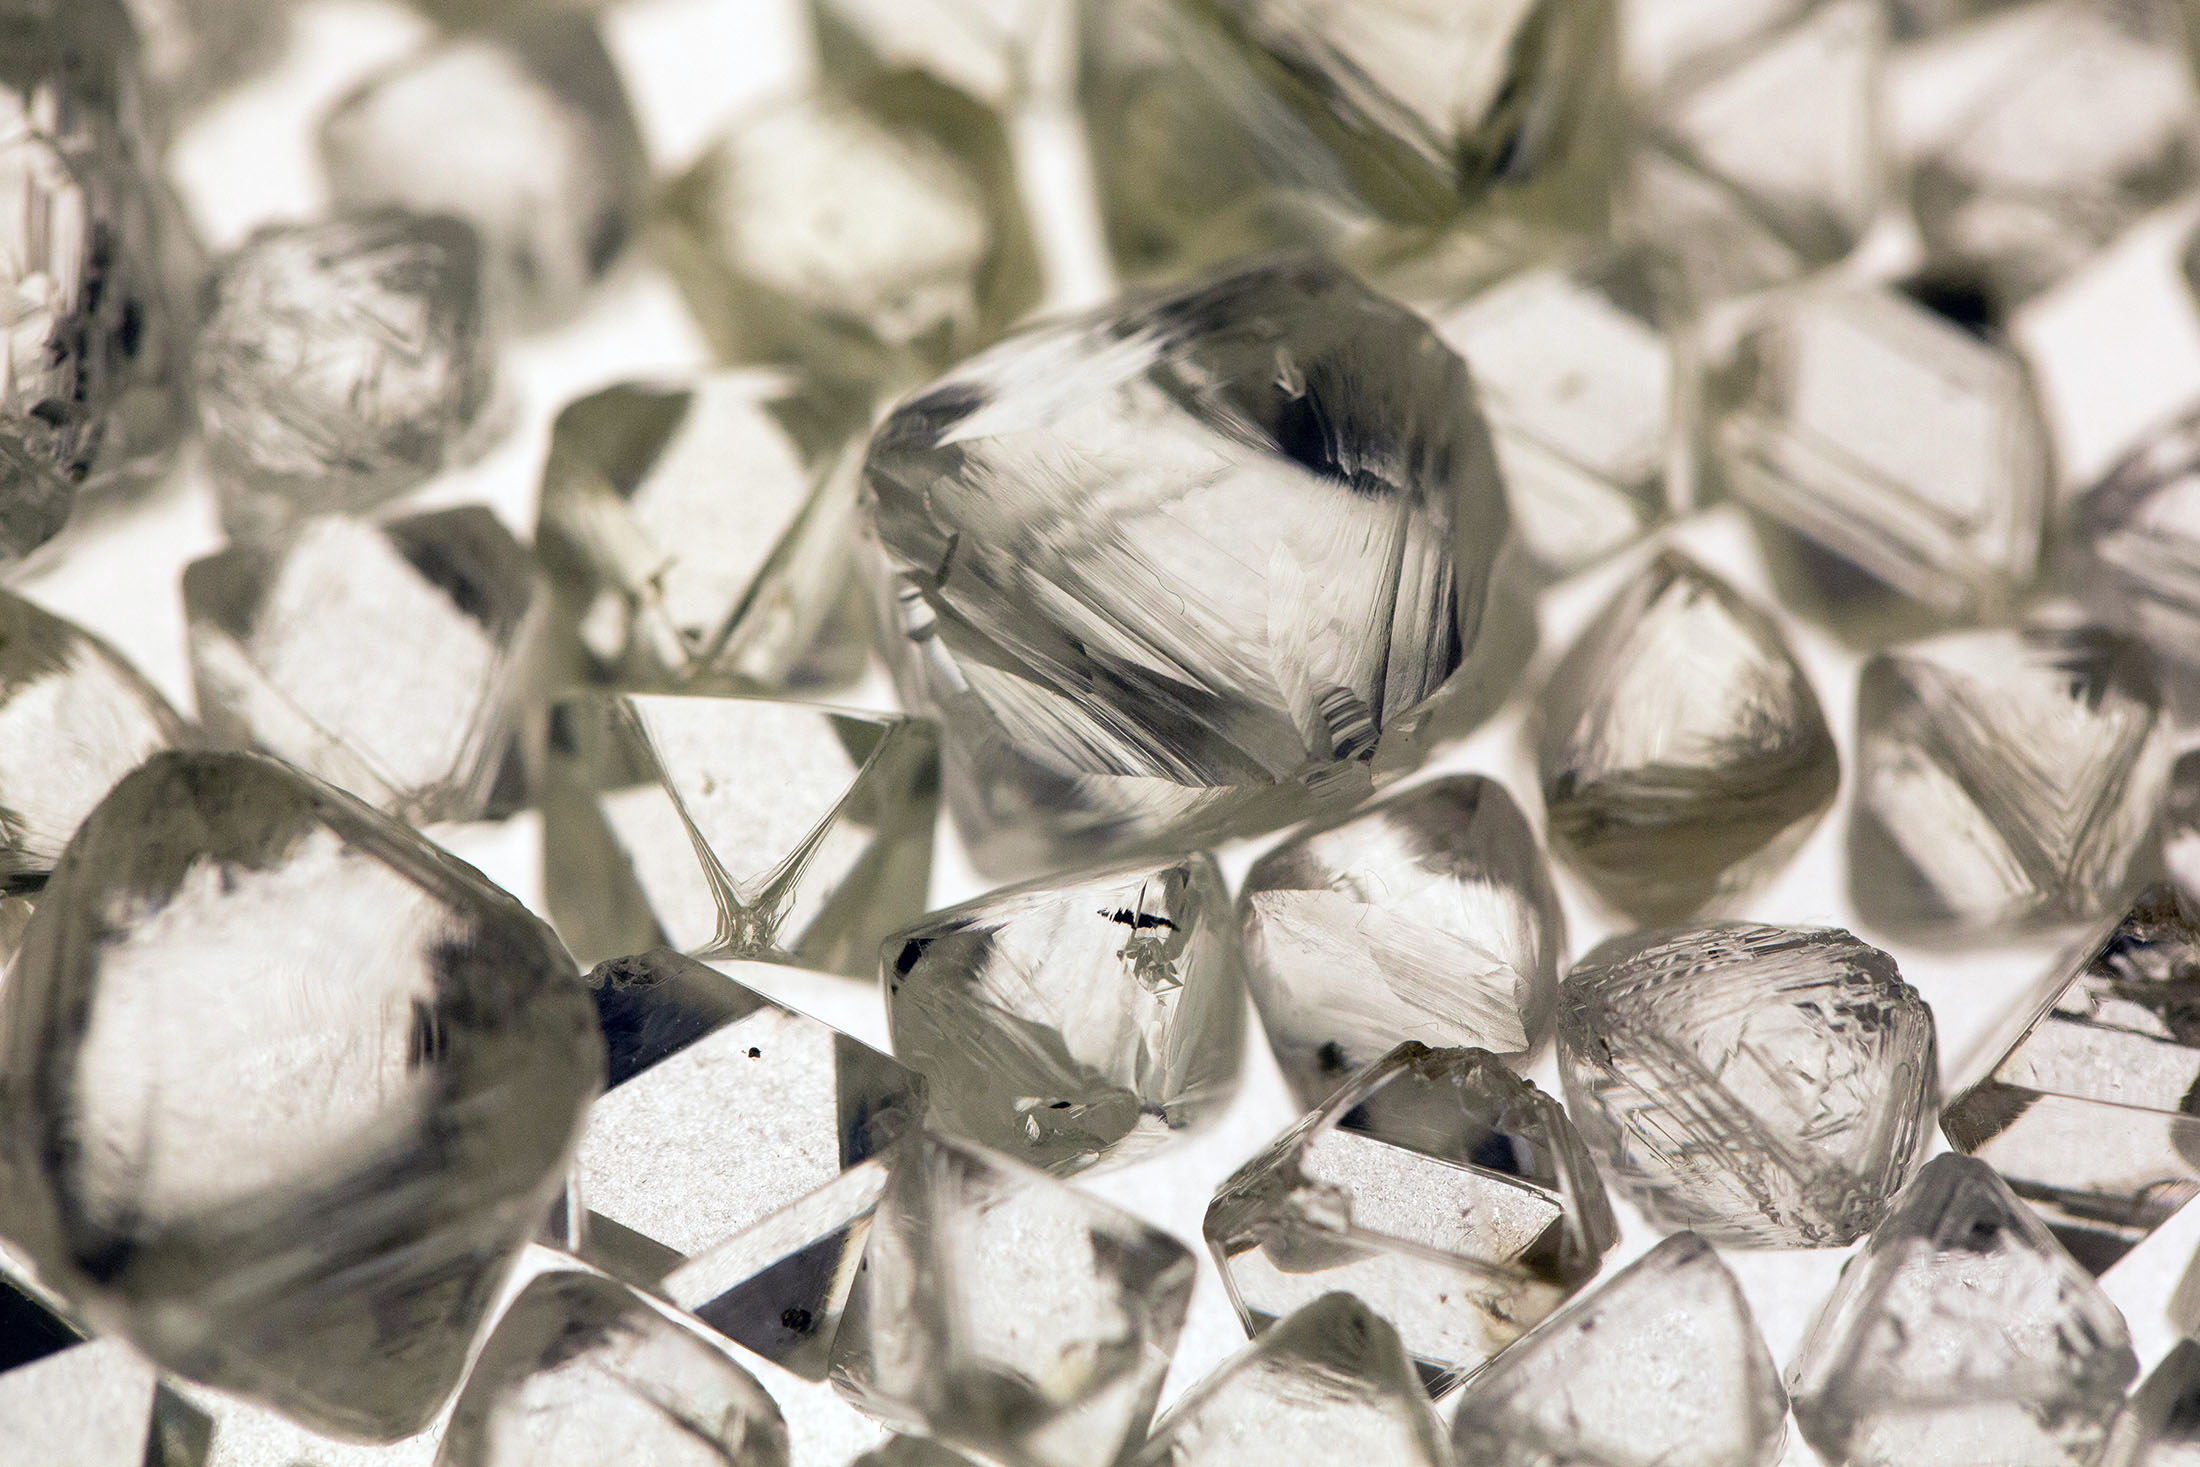 De Beers cuts diamond prices after covid-19 curbs demand 